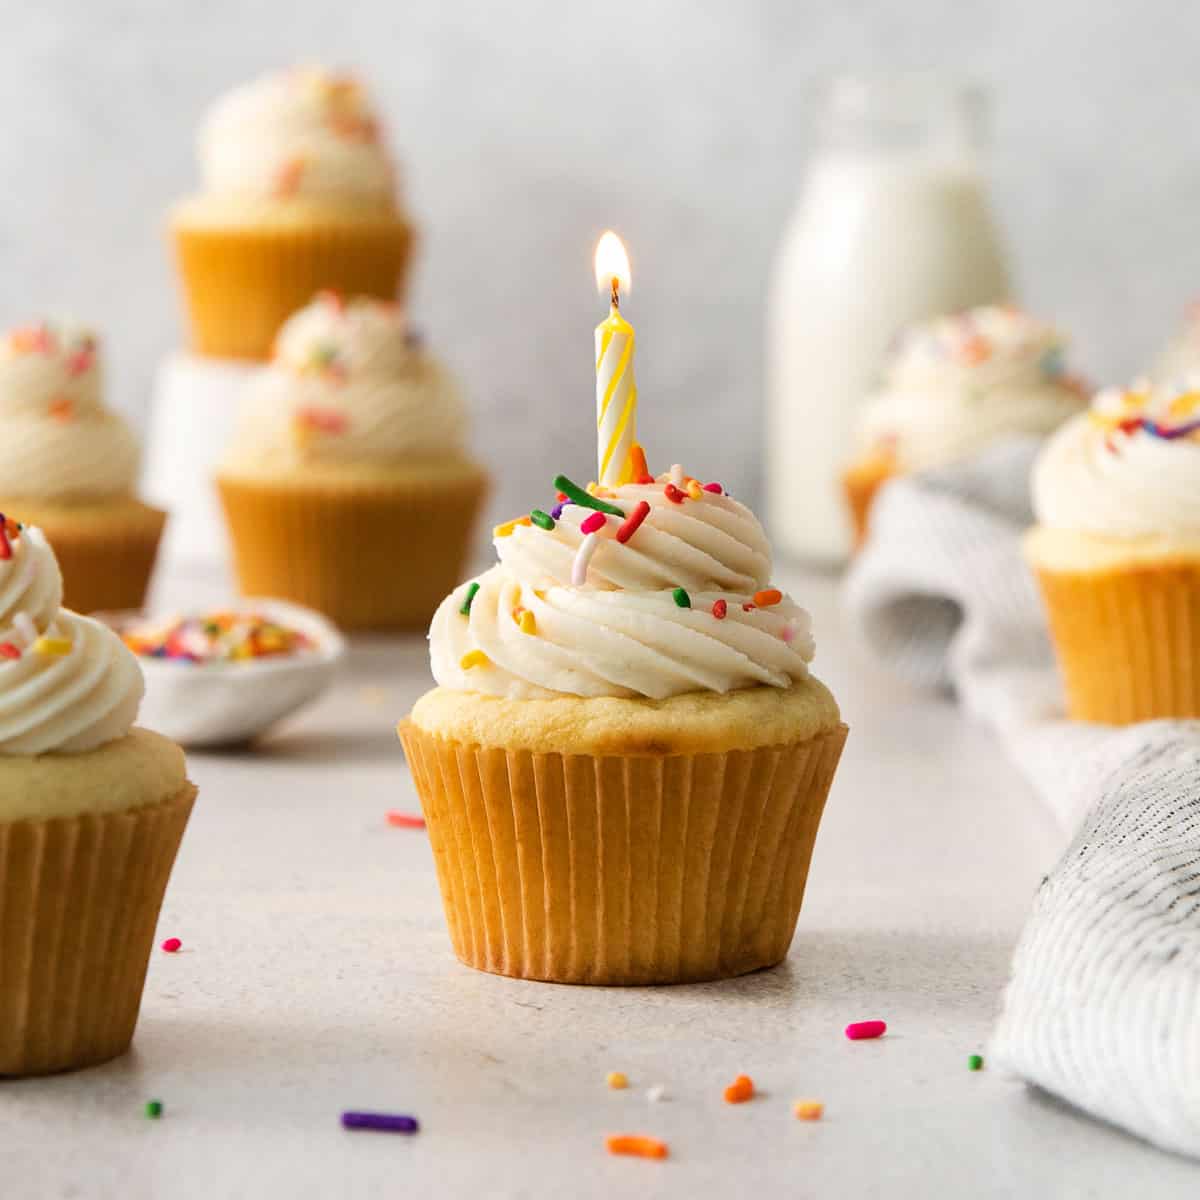 a gluten-free vanilla cupcake with a candle in it